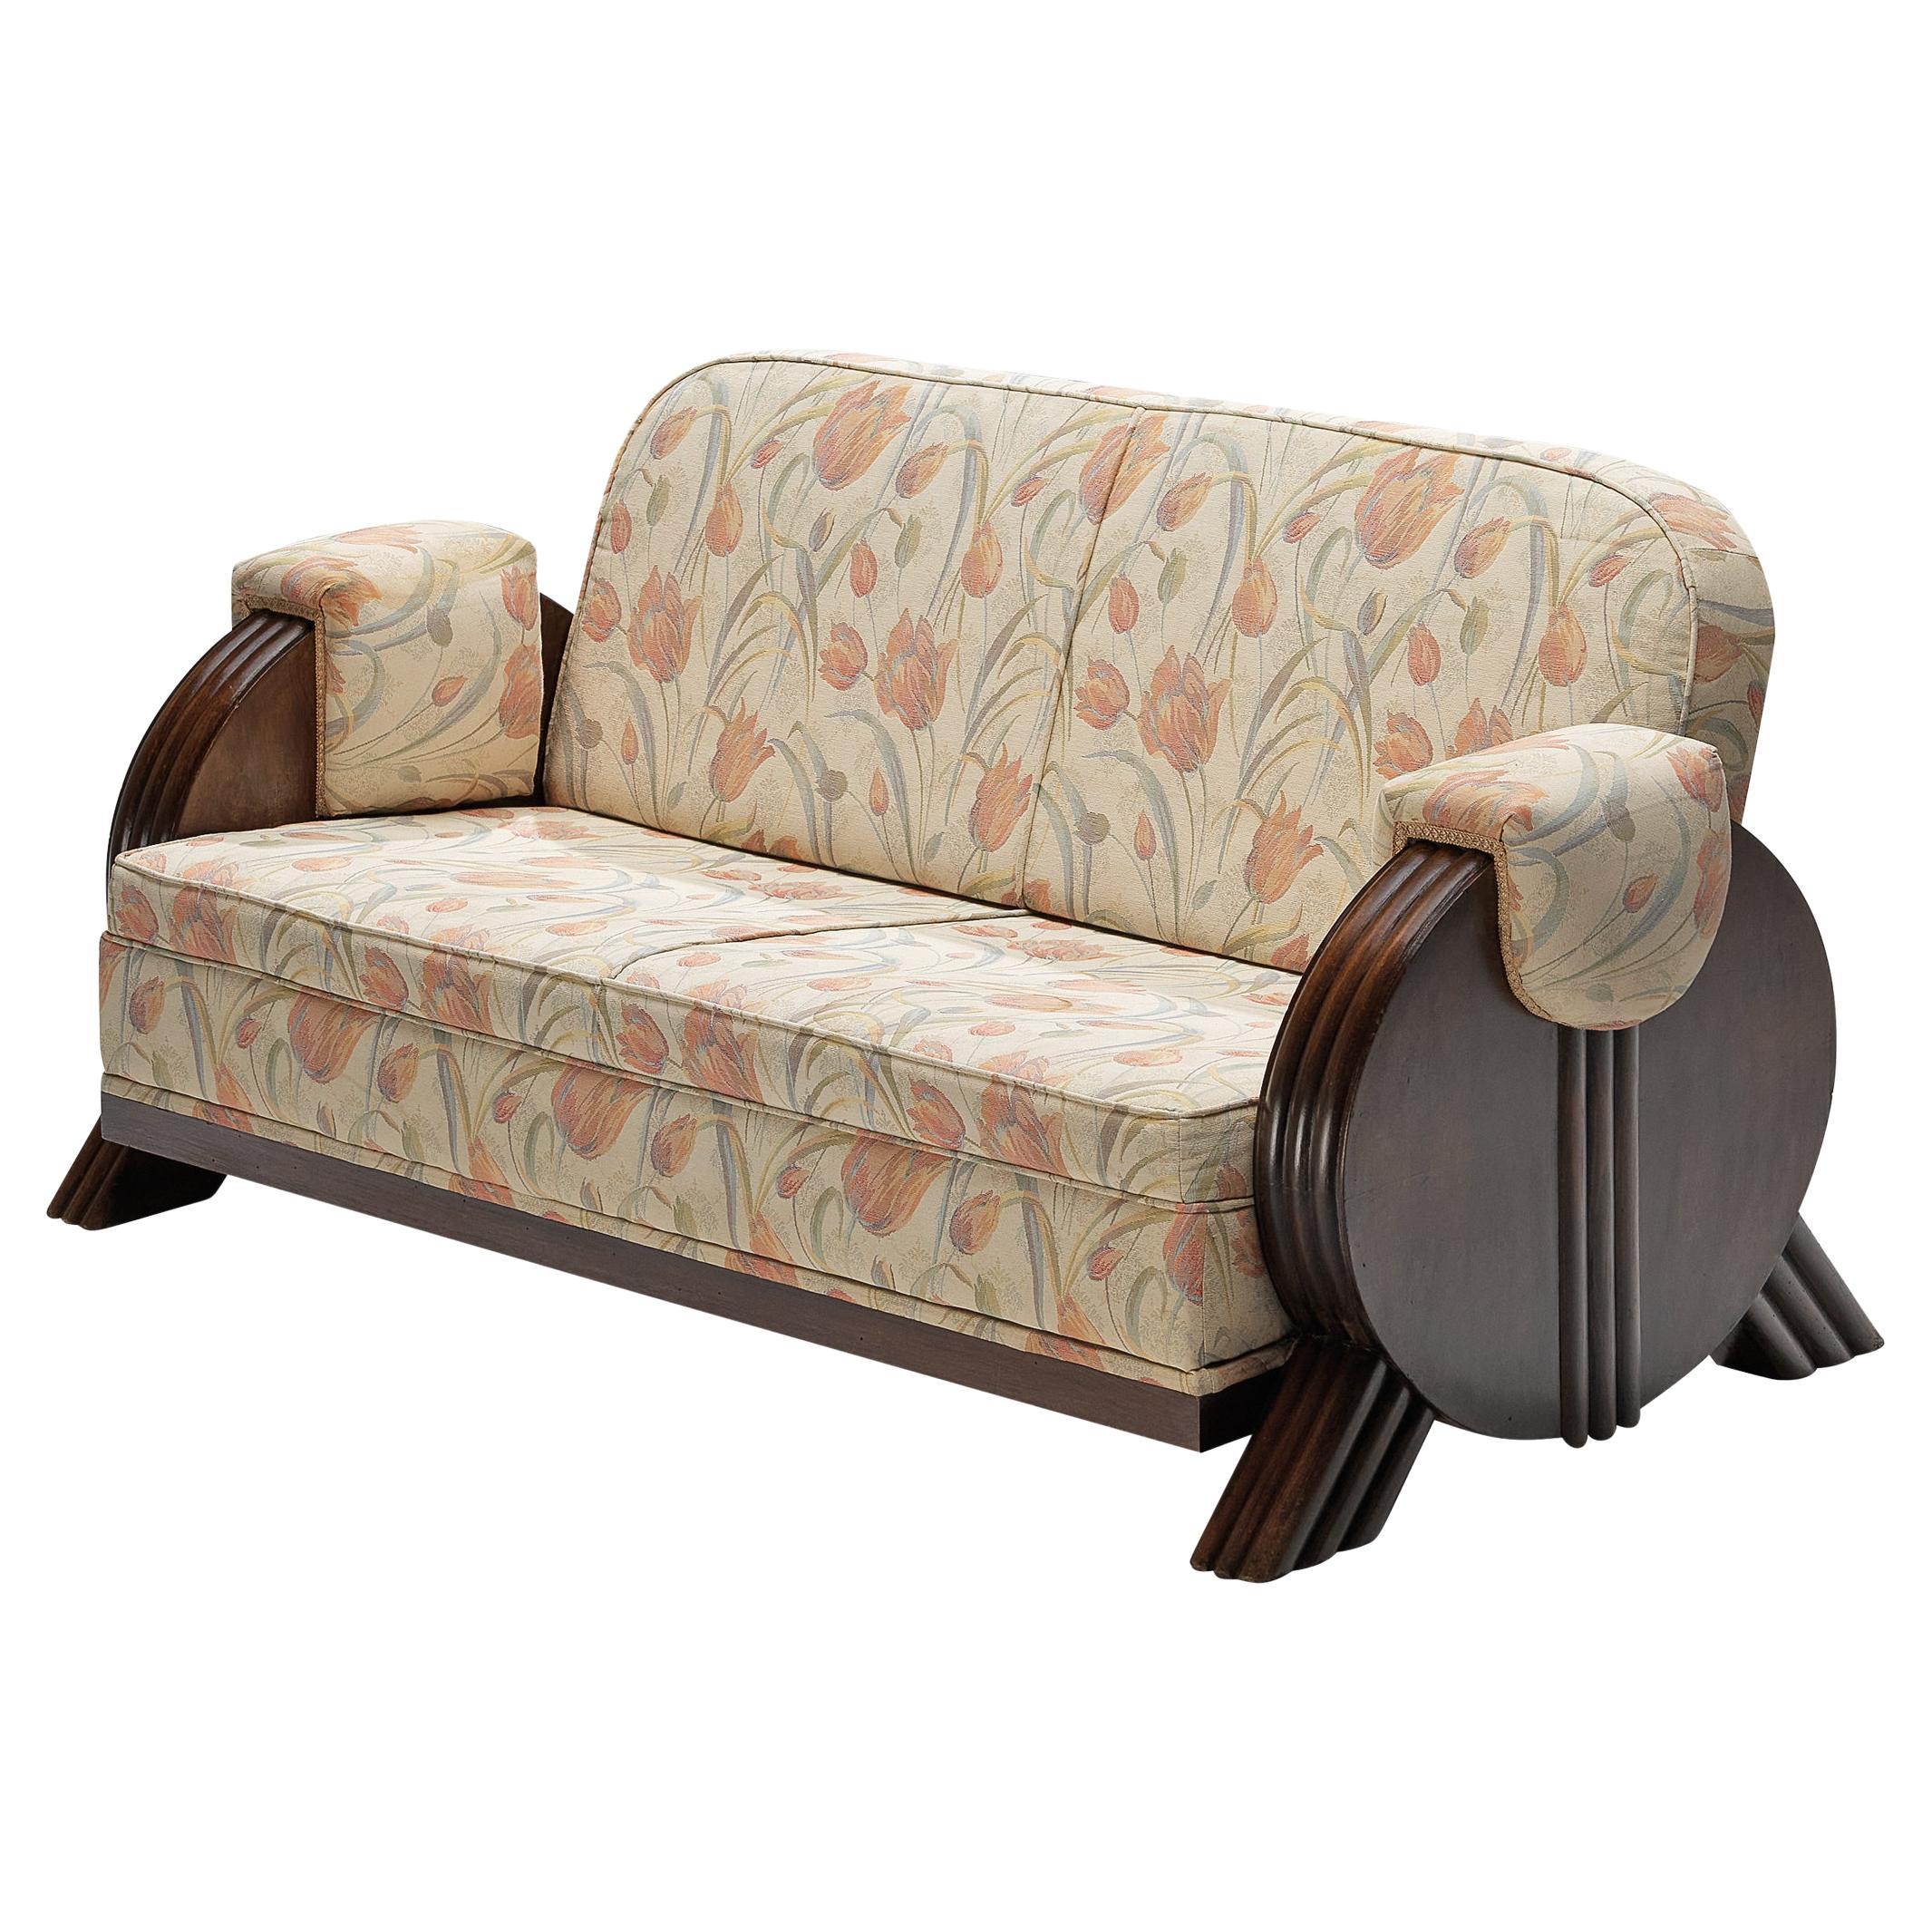 Art Deco Sofas - 302 For Sale at 1stDibs | vintage sofa, vintage couch,  curved art deco sofa